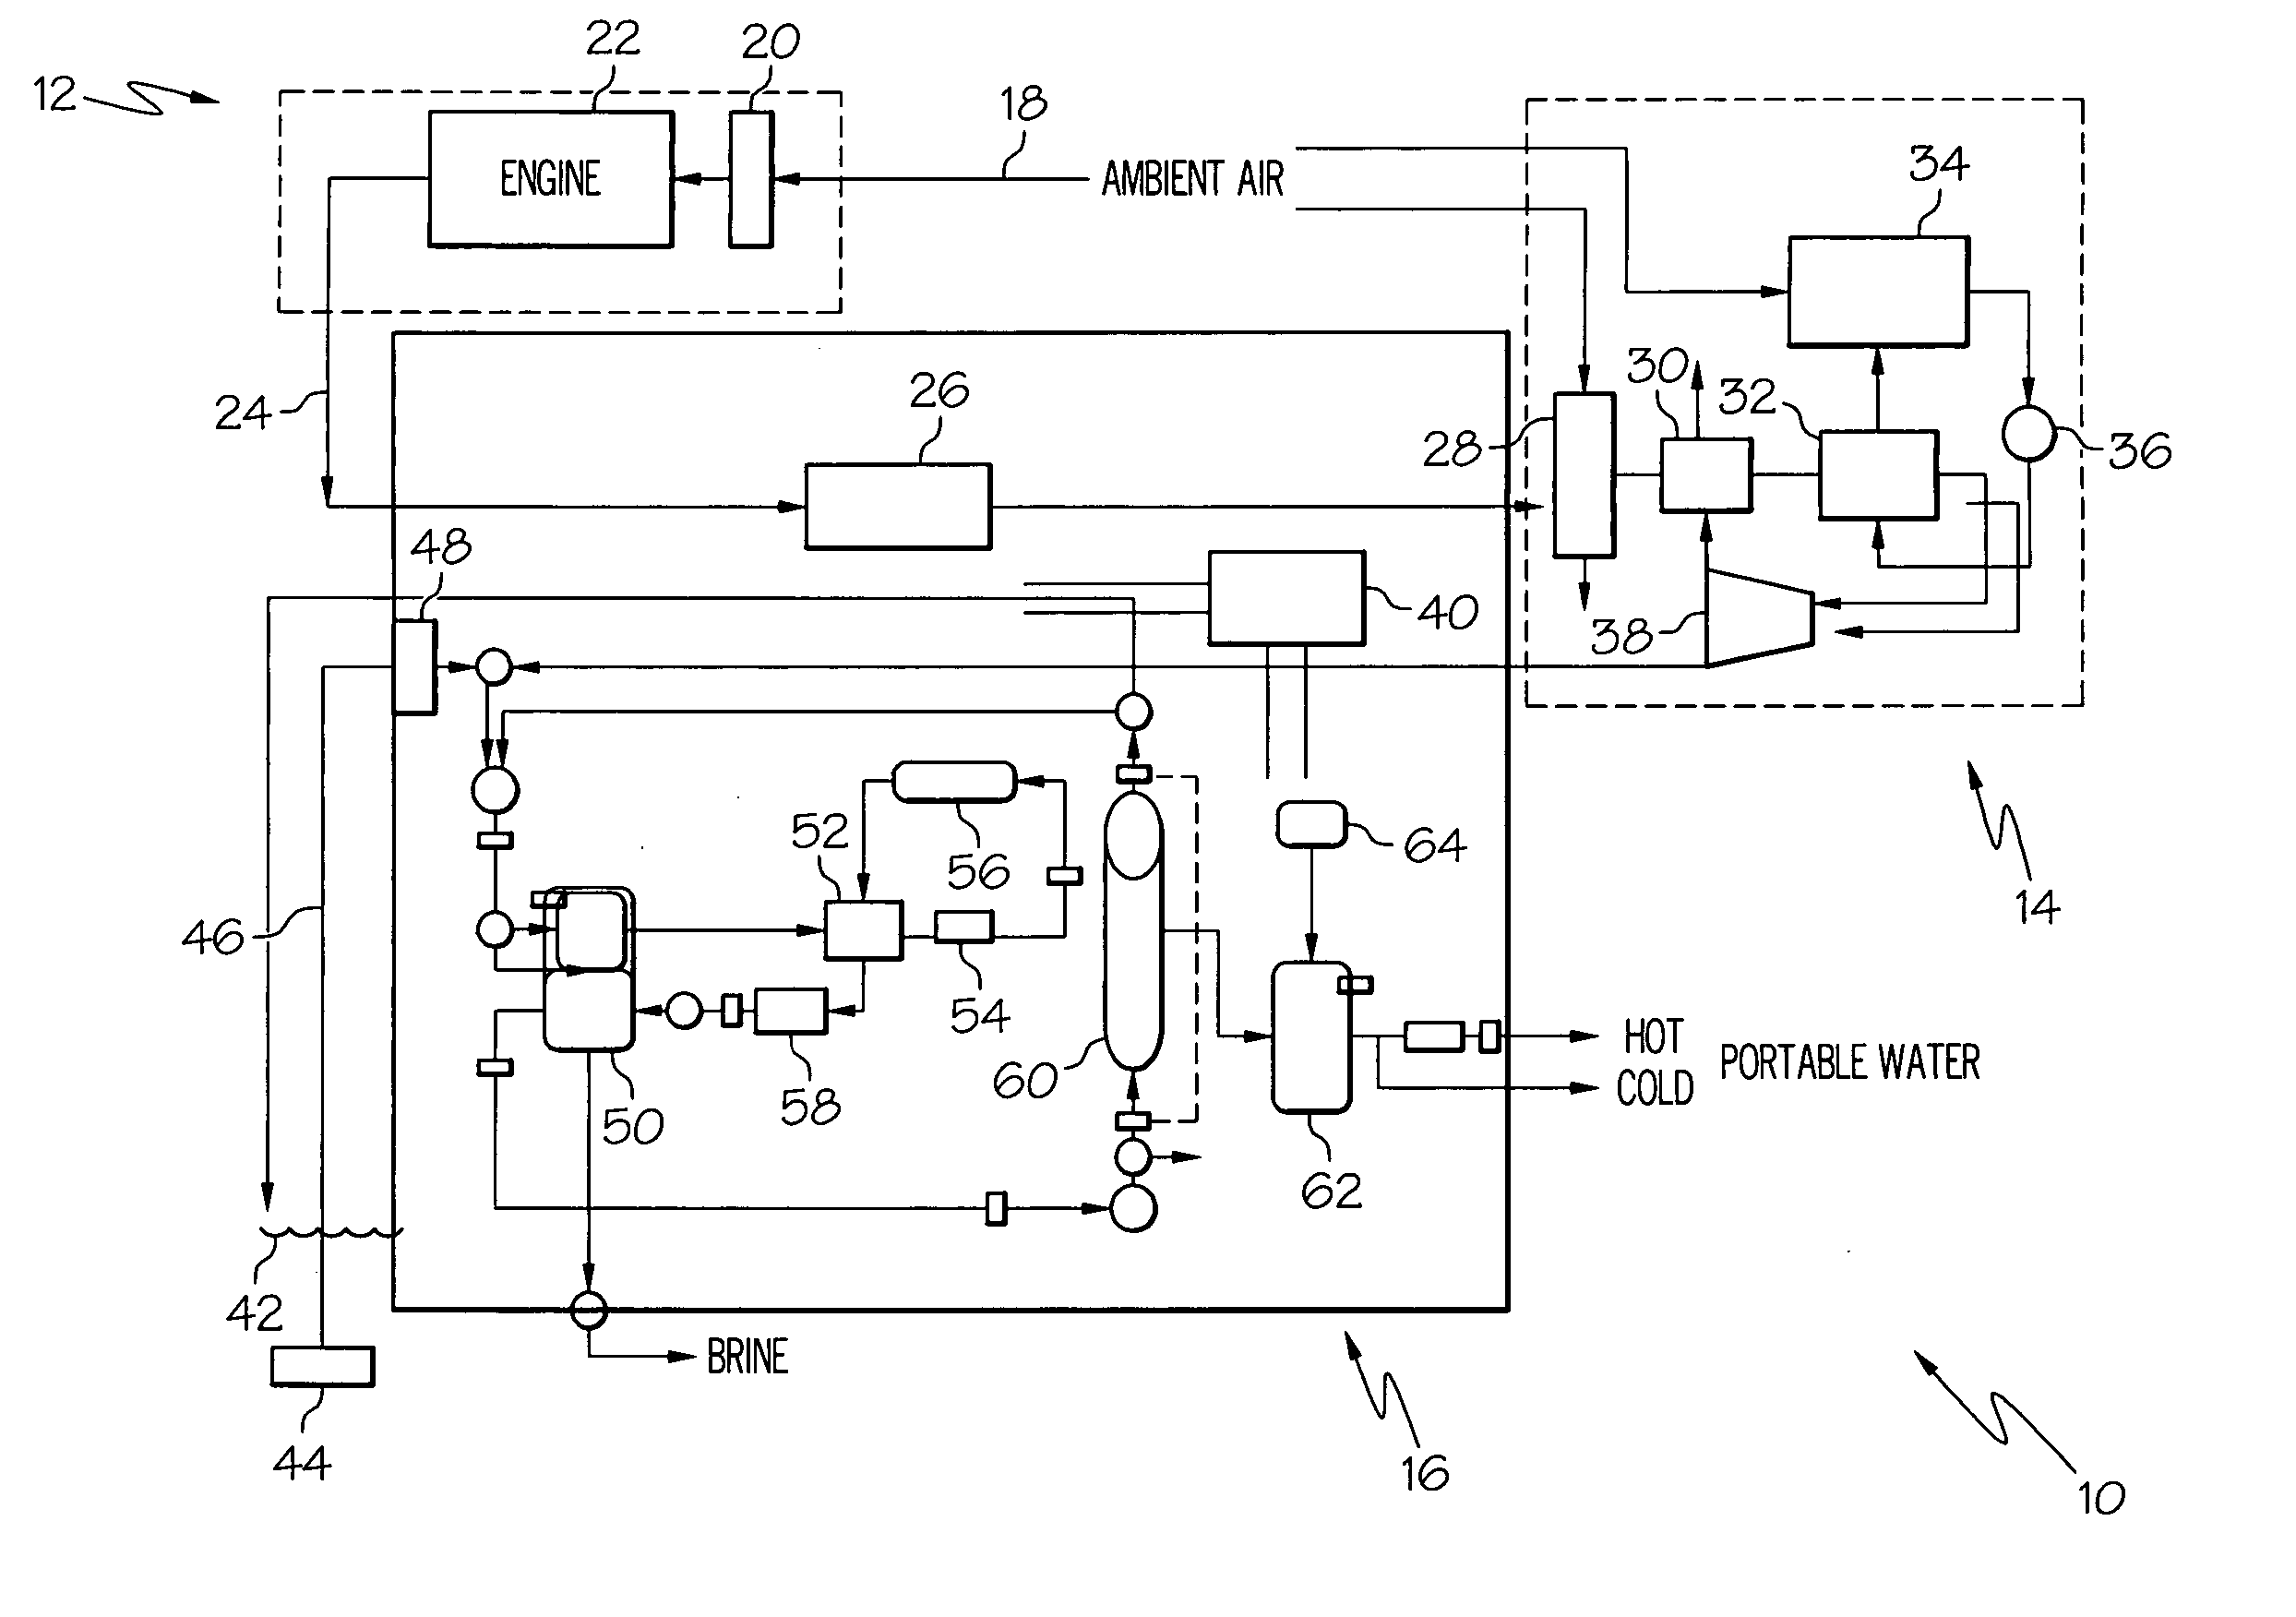 Water purification system and modes of operation